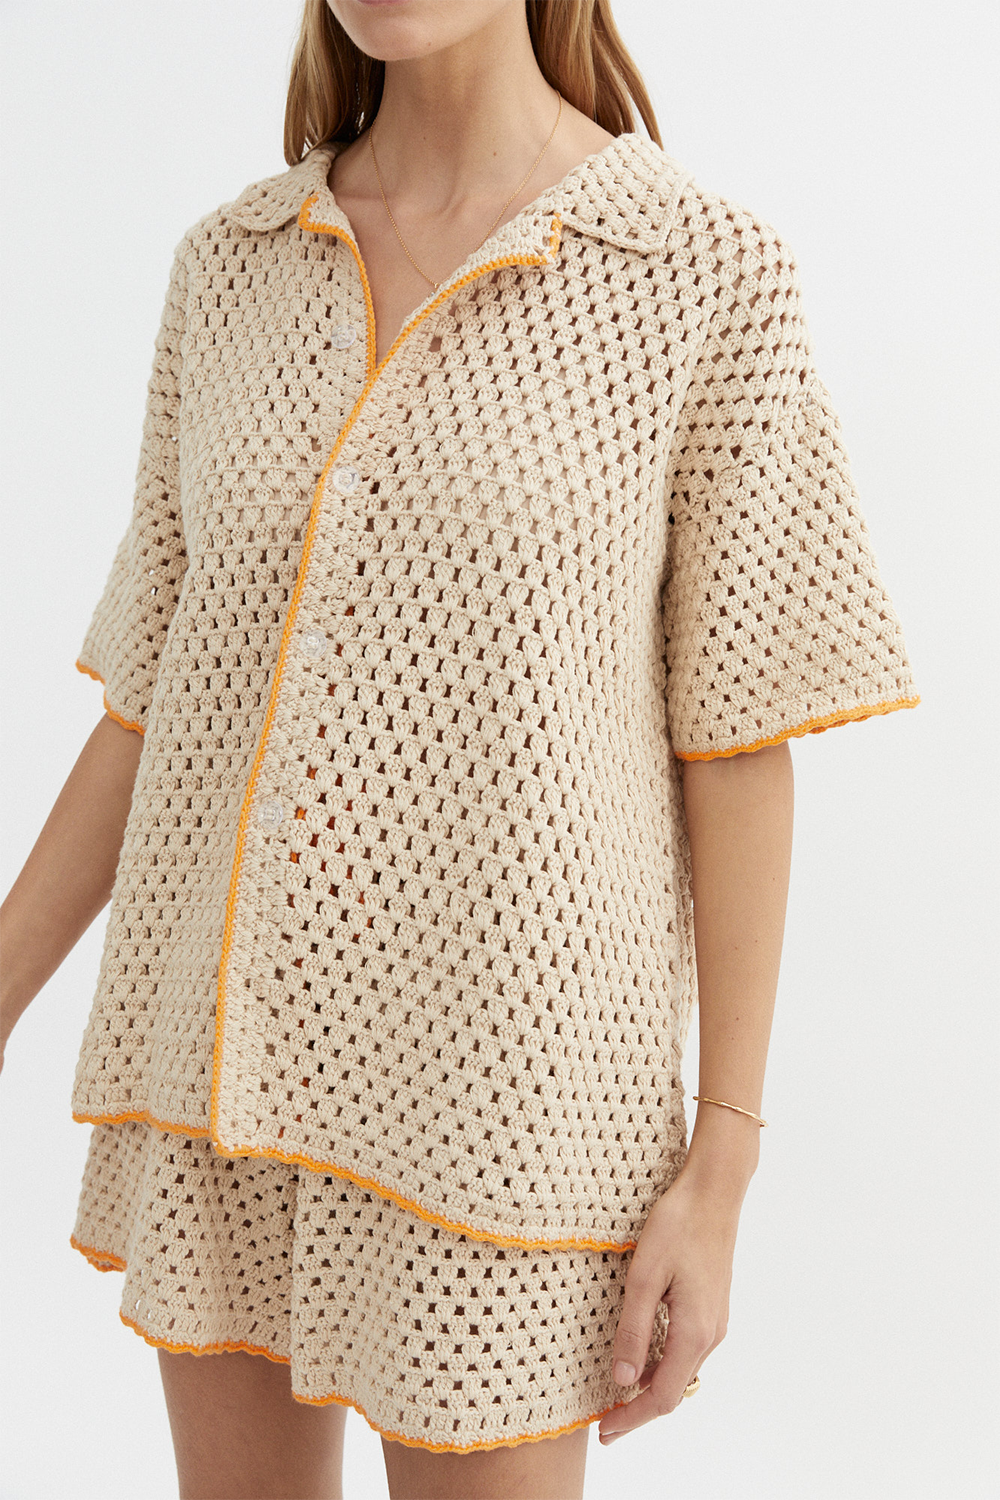 Connie Knit Shirt in Sand